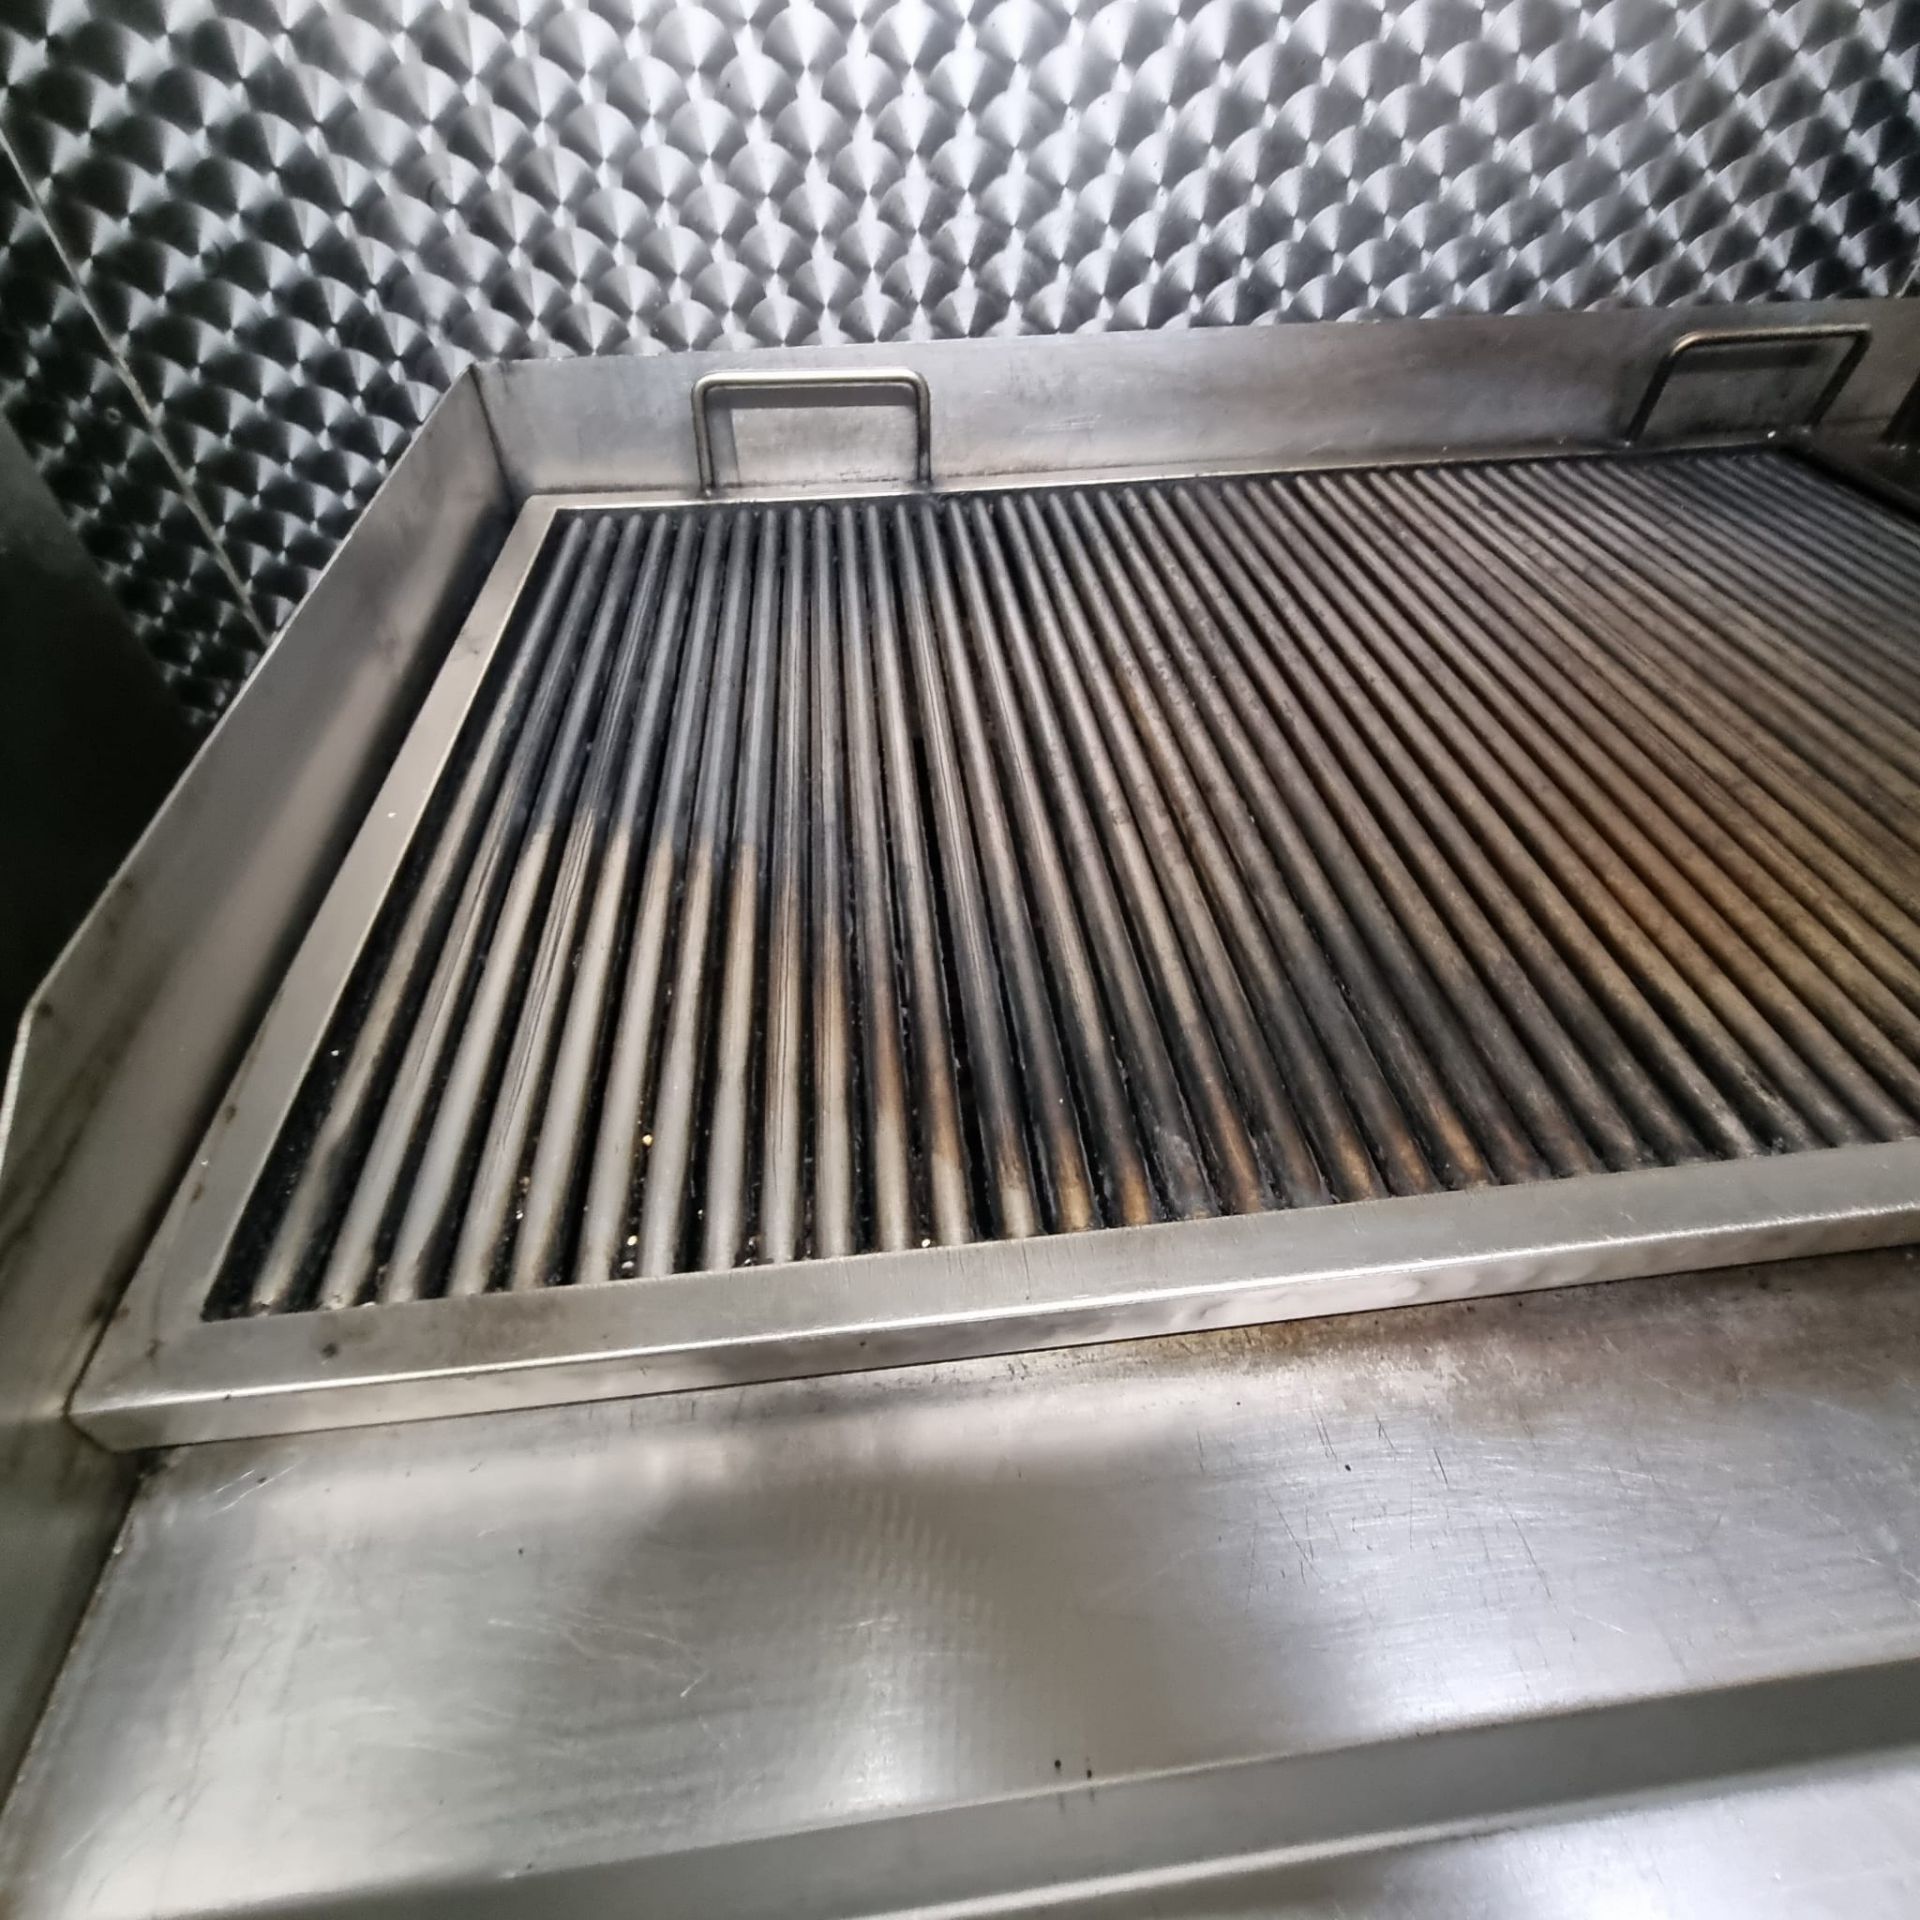 3 BURNER CHARGRILL - NATURAL GAS STILL CONNECTED IN SHOP - 900 MMW  - WATER TRAY UNDER - Image 2 of 3